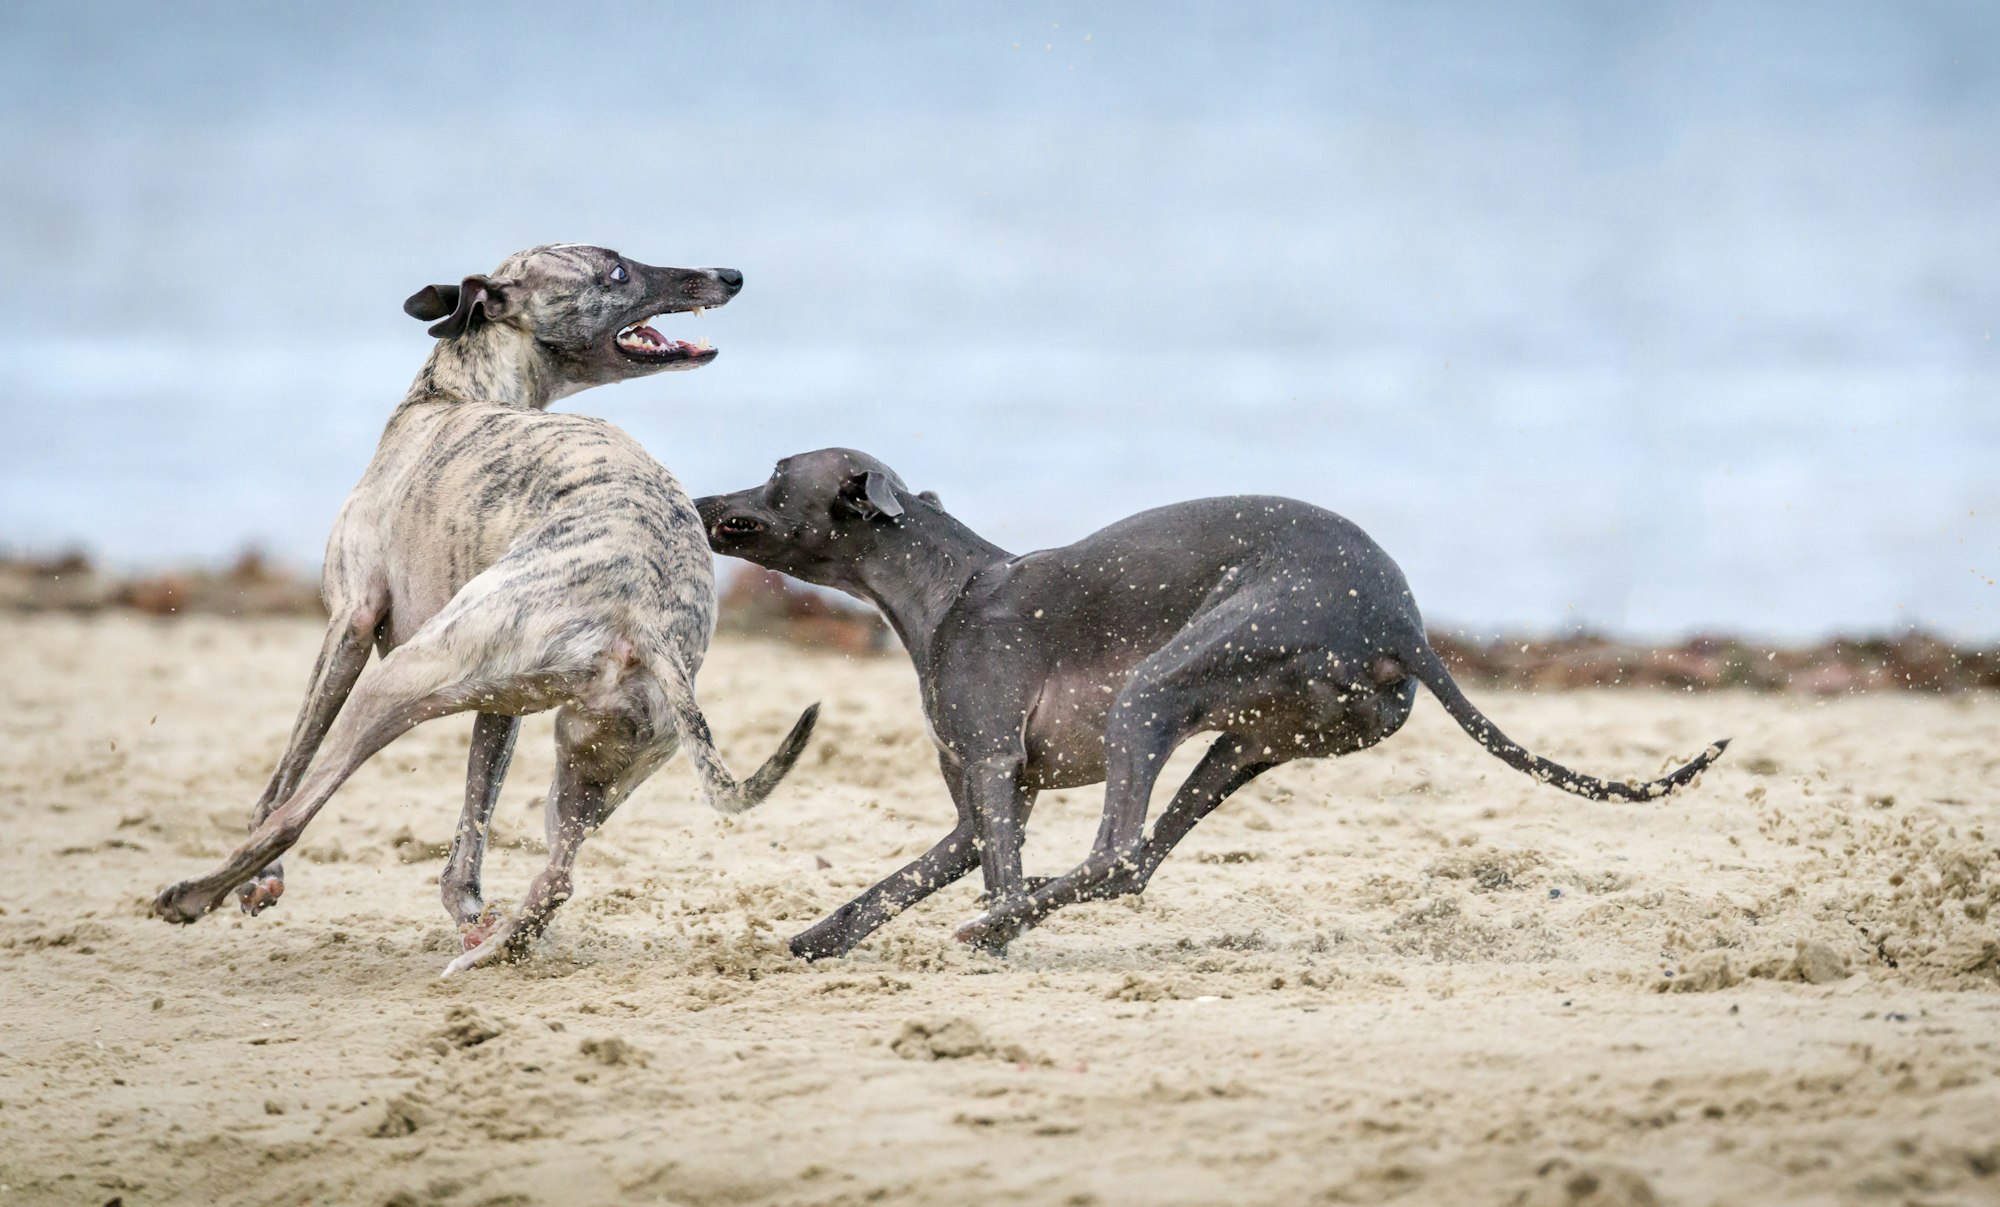 Two dogs playing on the beach